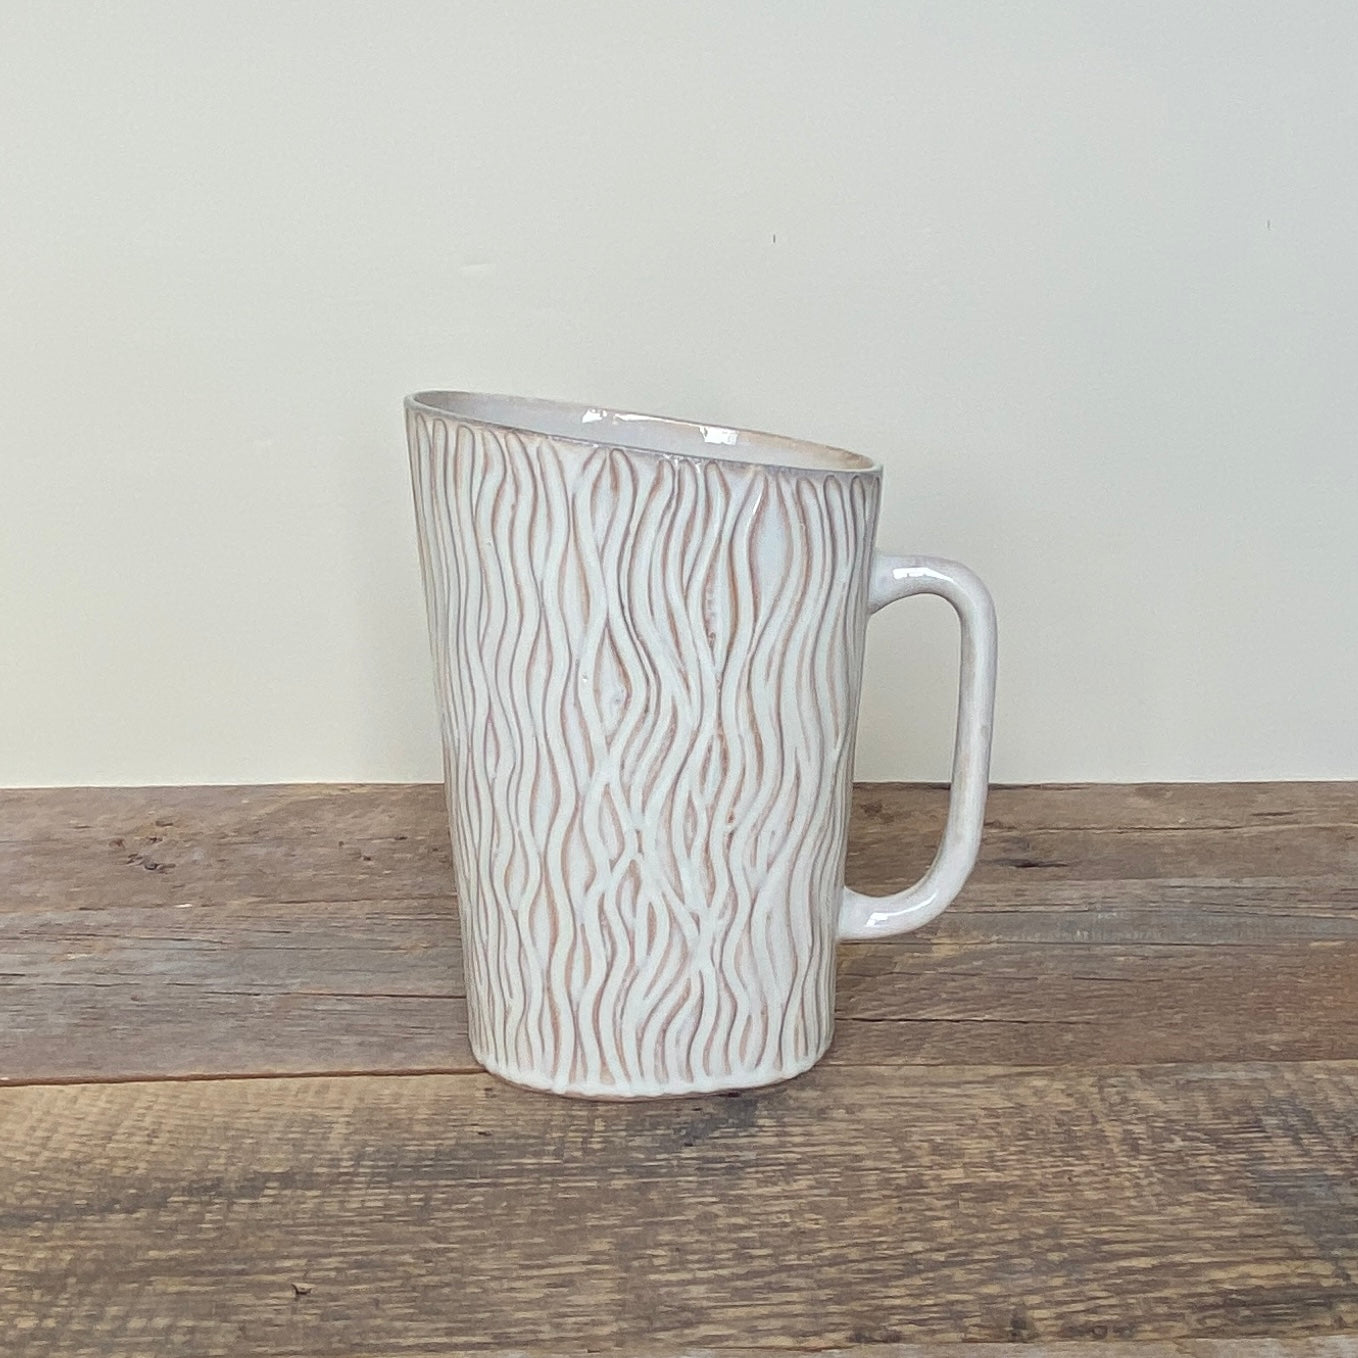 MILK JUG IN OATMEAL WITH VERTIVAL WAVES